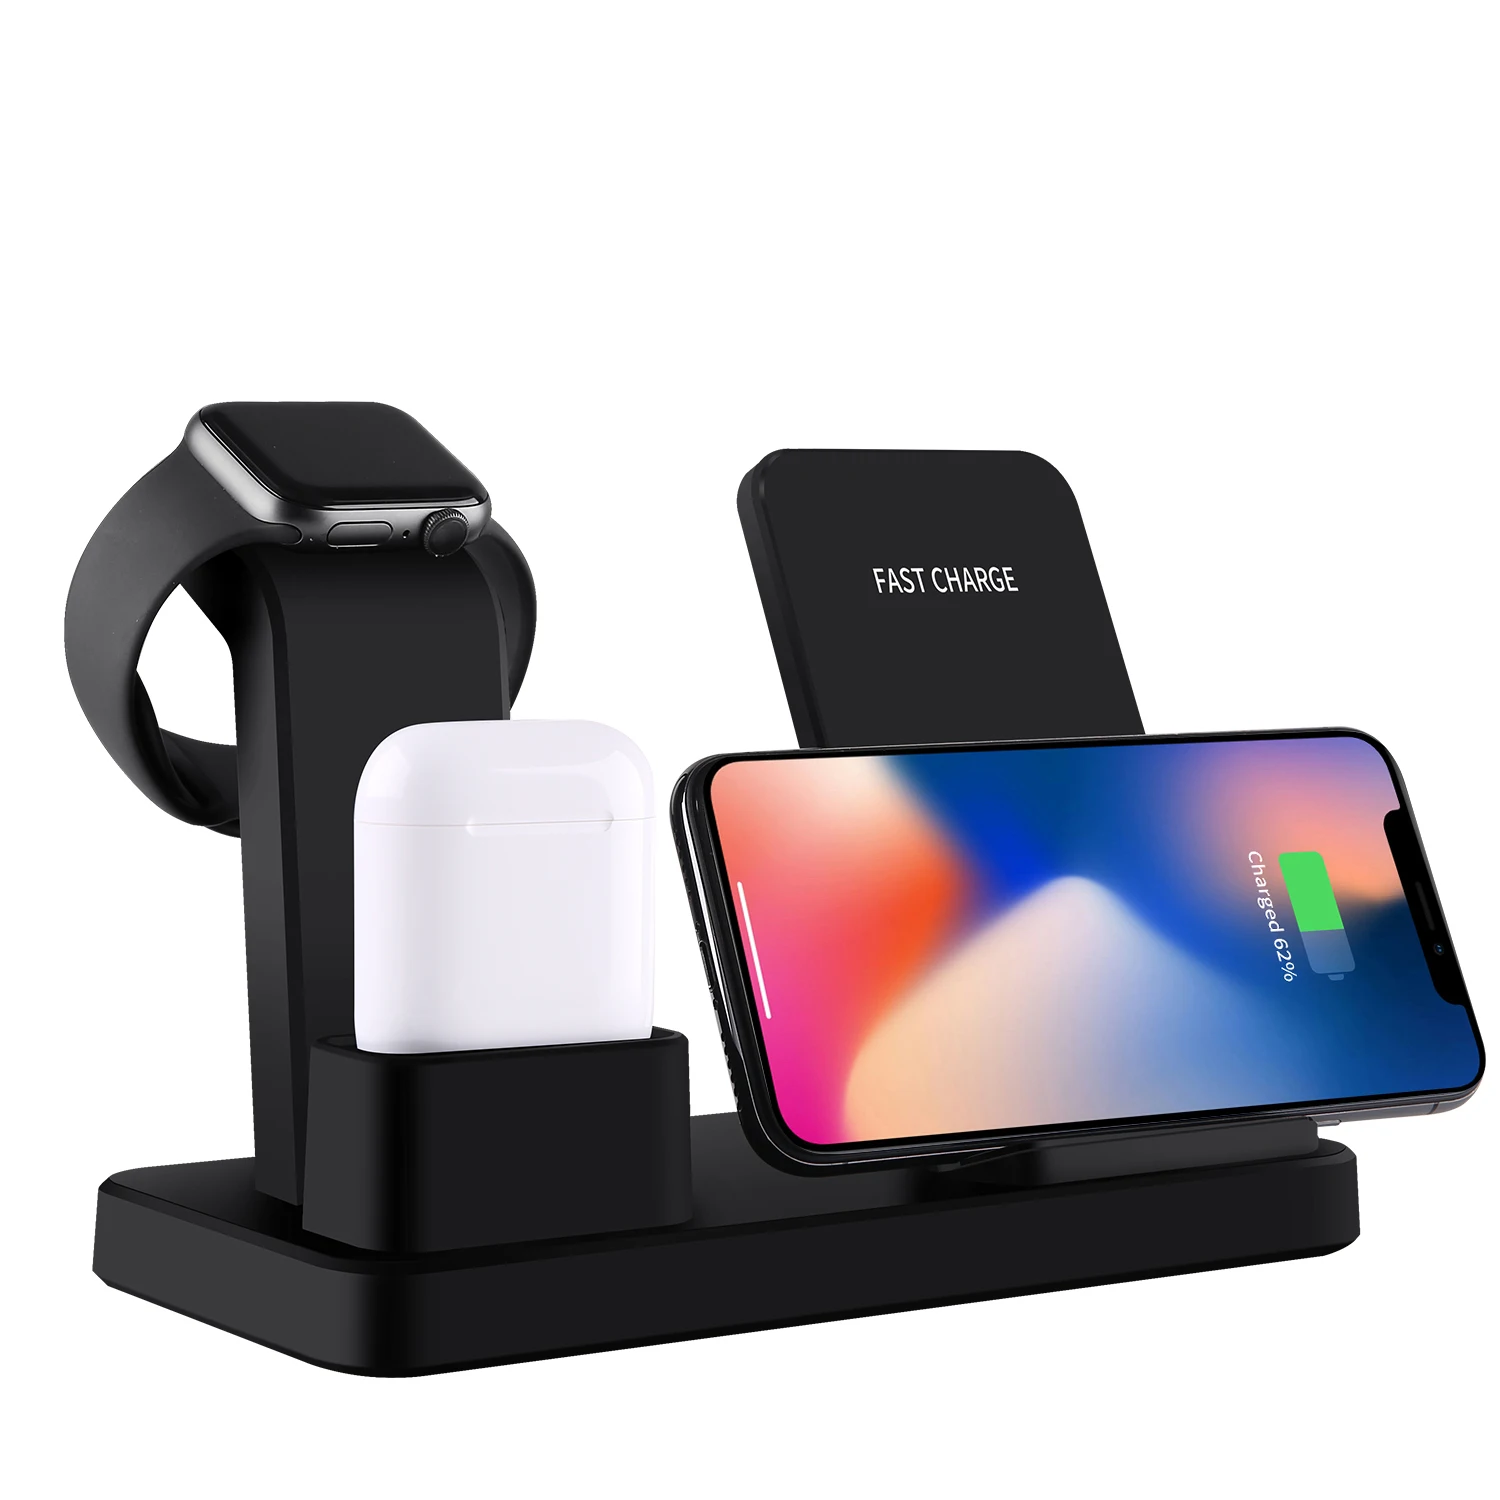 

2019 new arrivals Stand Wireless Charging Station with for iPhone 8/X/XR/7/6 and i Watch Series 4/3/2/1, Black/grey/oem